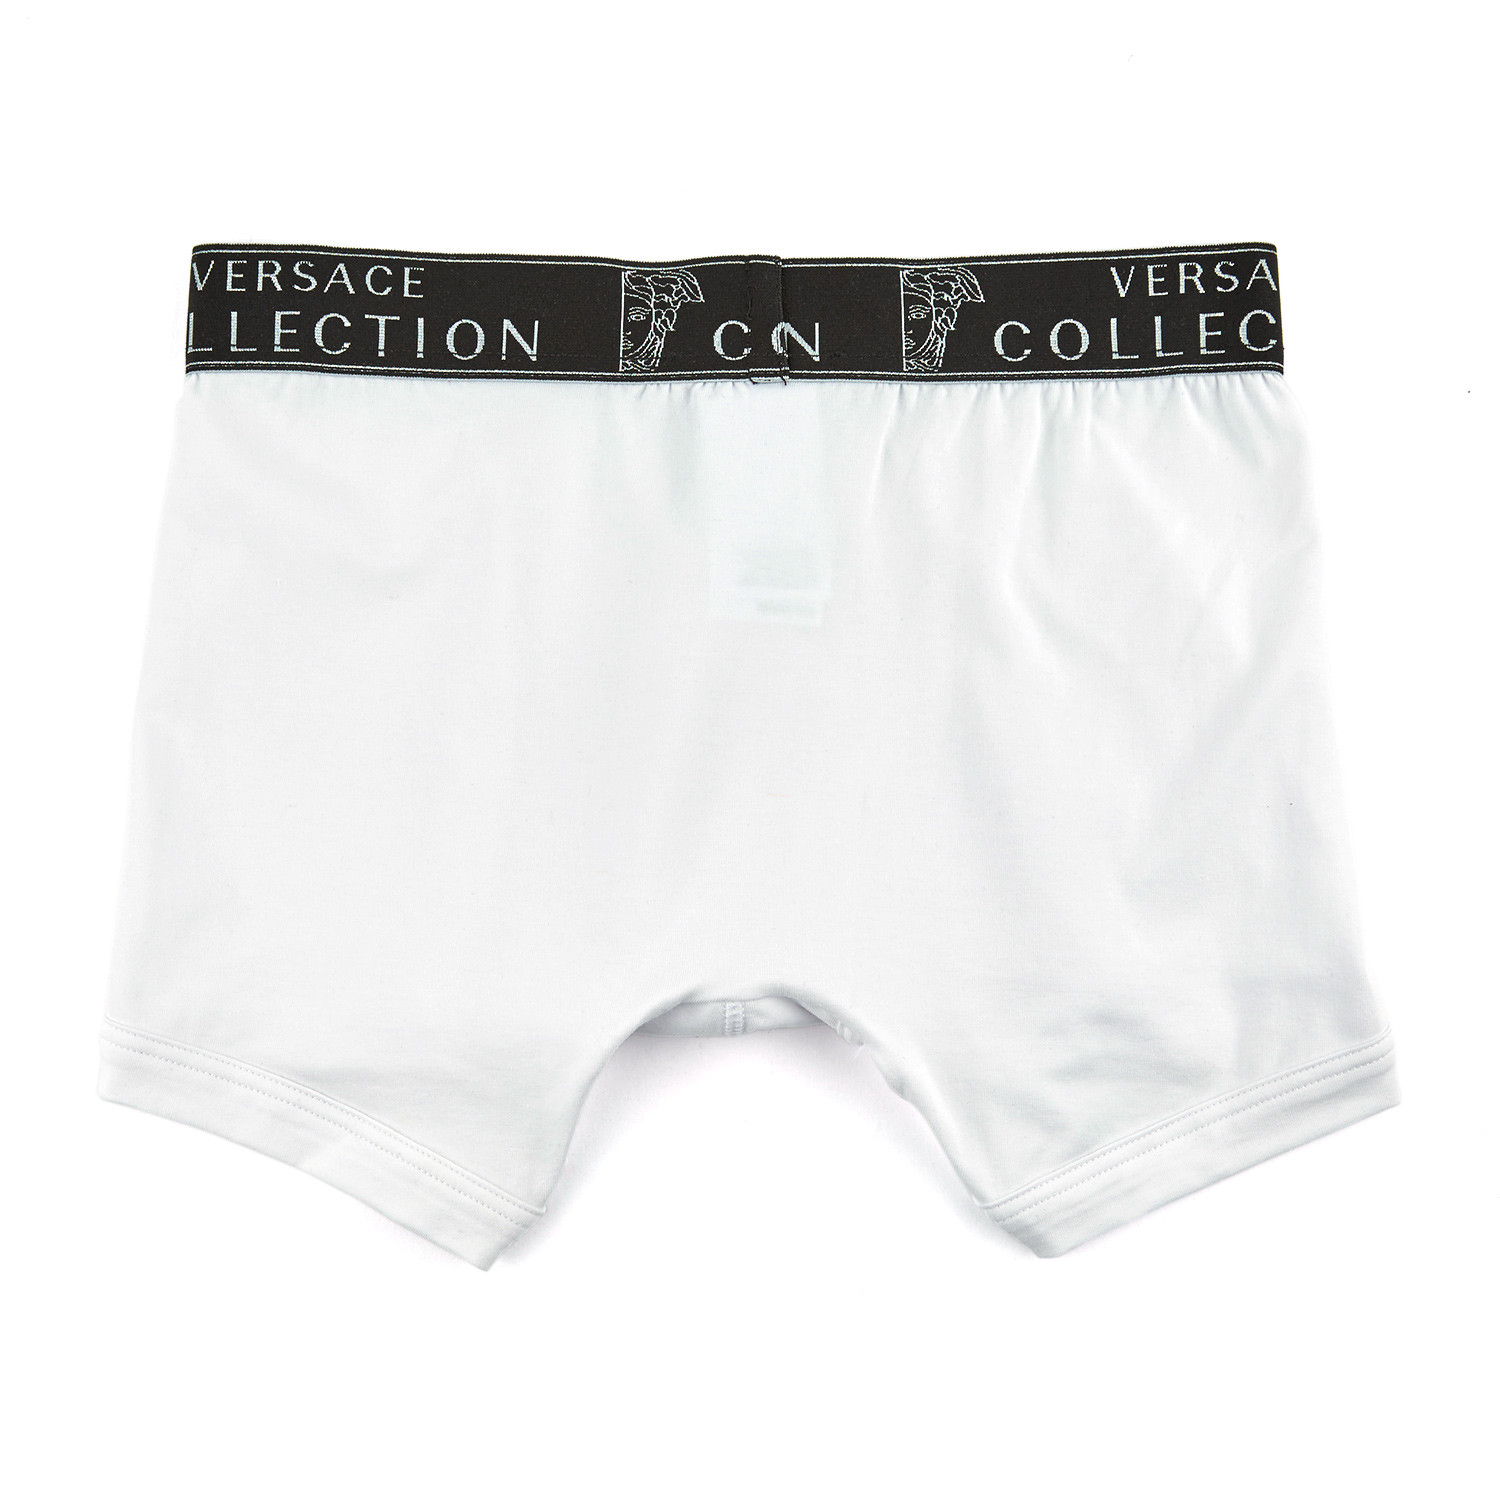 Boxers // White // Pack of 3 (Large) - Versace - Touch of Modern